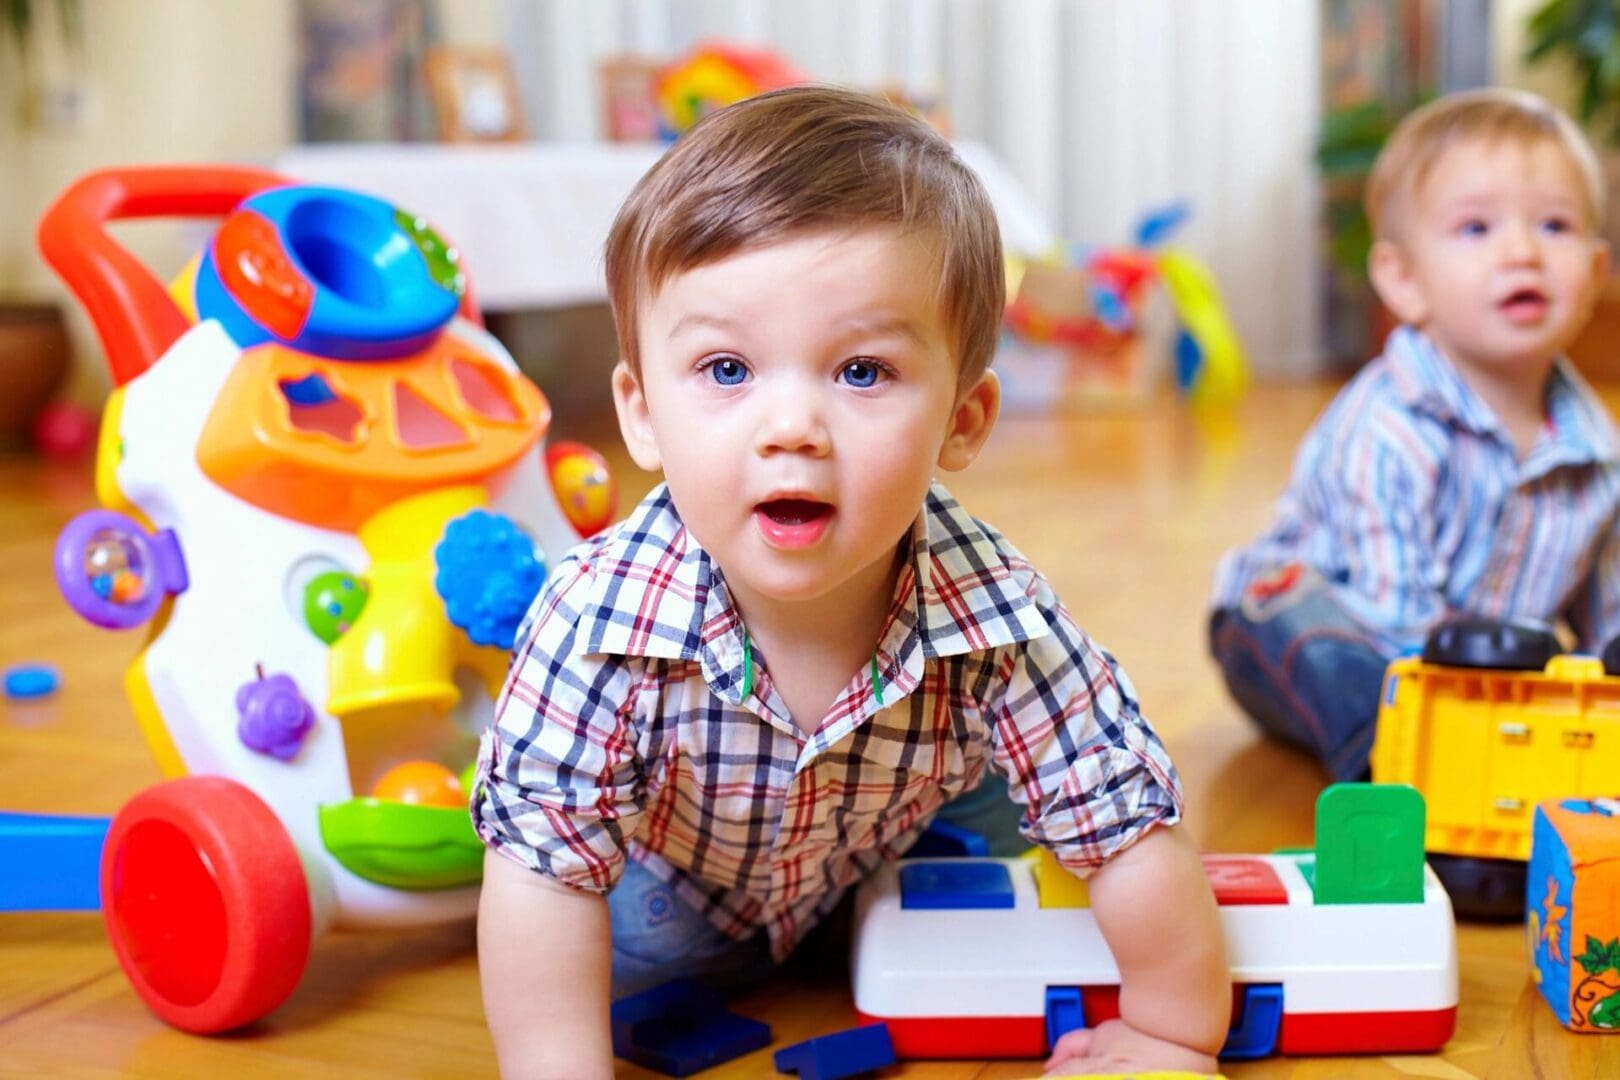 A baby is playing with toys on the floor.